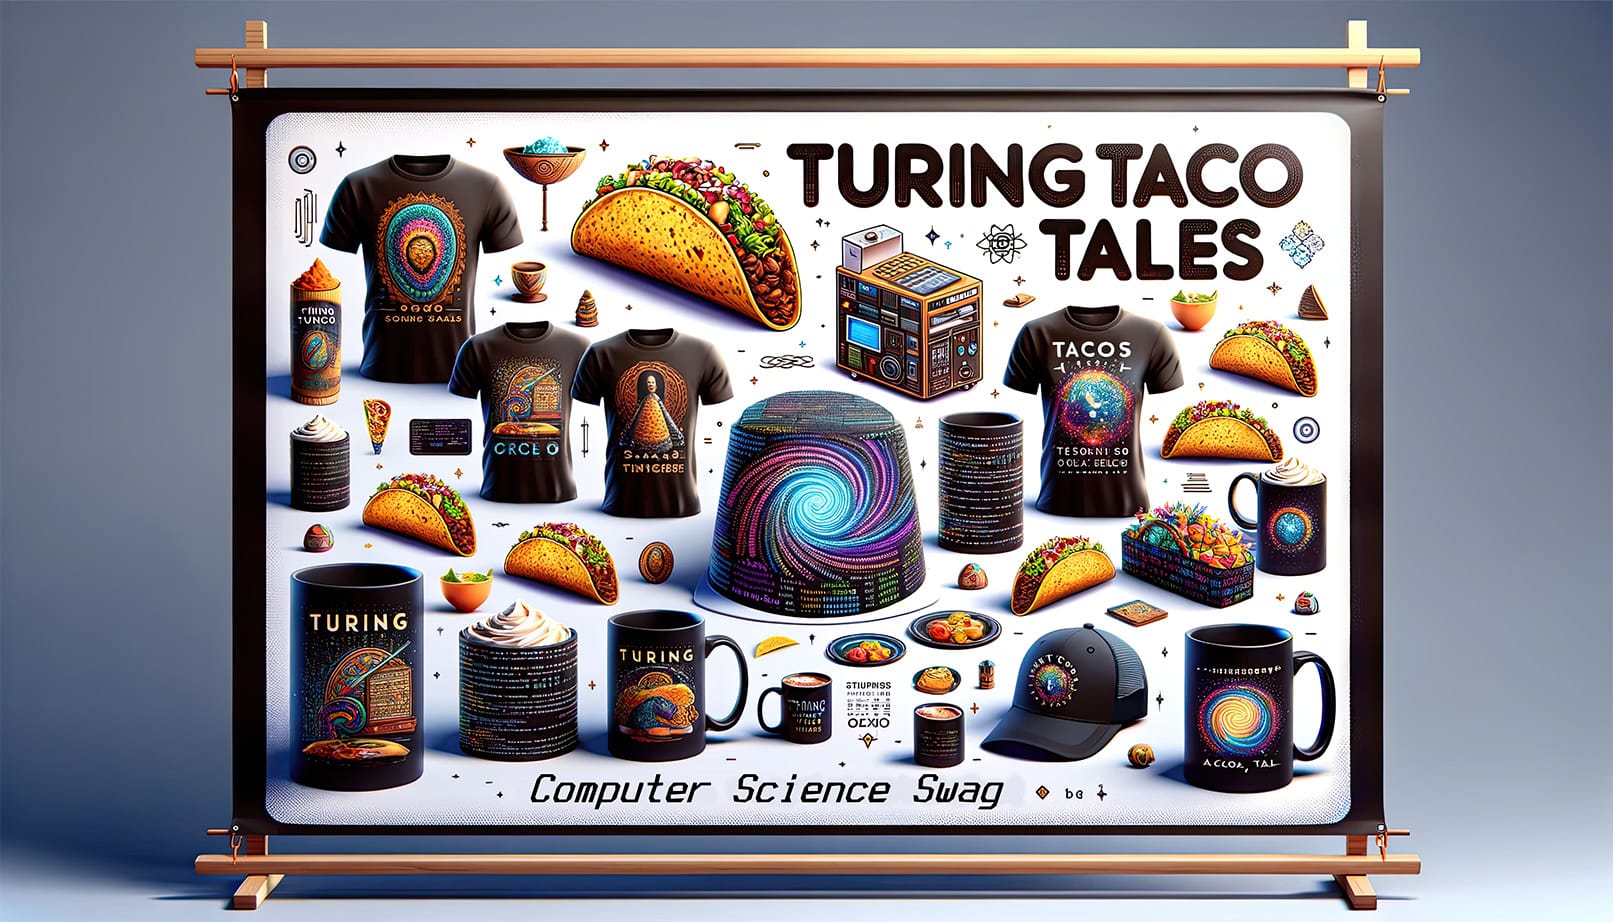 A display of computer science-themed merchandise, including vibrant T-shirts, mugs, and hats with swirling patterns and coding symbols, all under the banner 'Turing Taco Tales